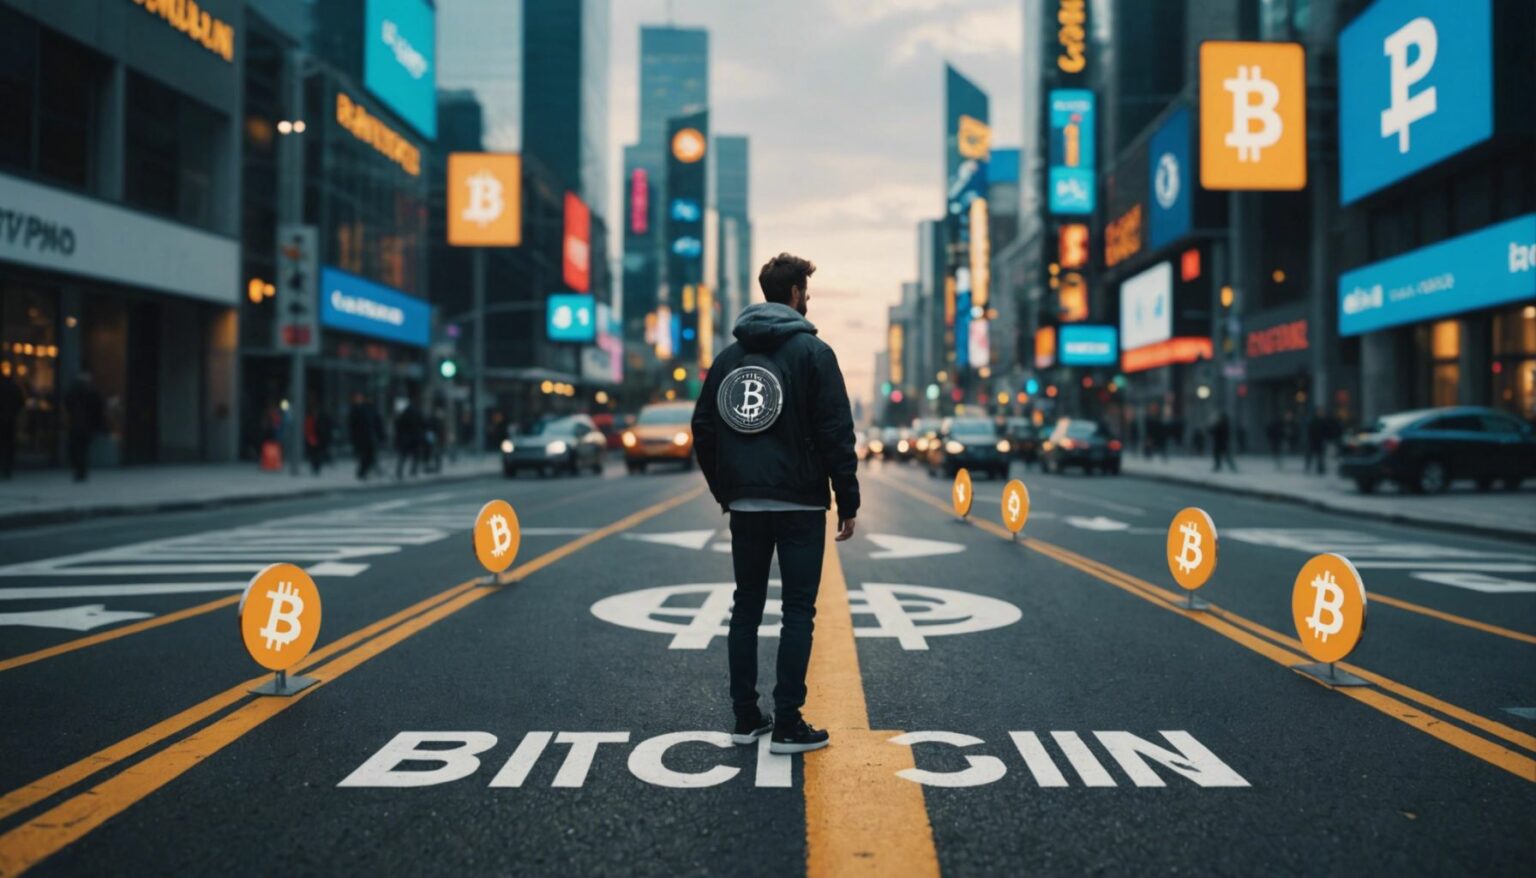 Person at crossroads with Bitcoin, Ethereum, Litecoin symbols, representing choices in the cryptocurrency world.